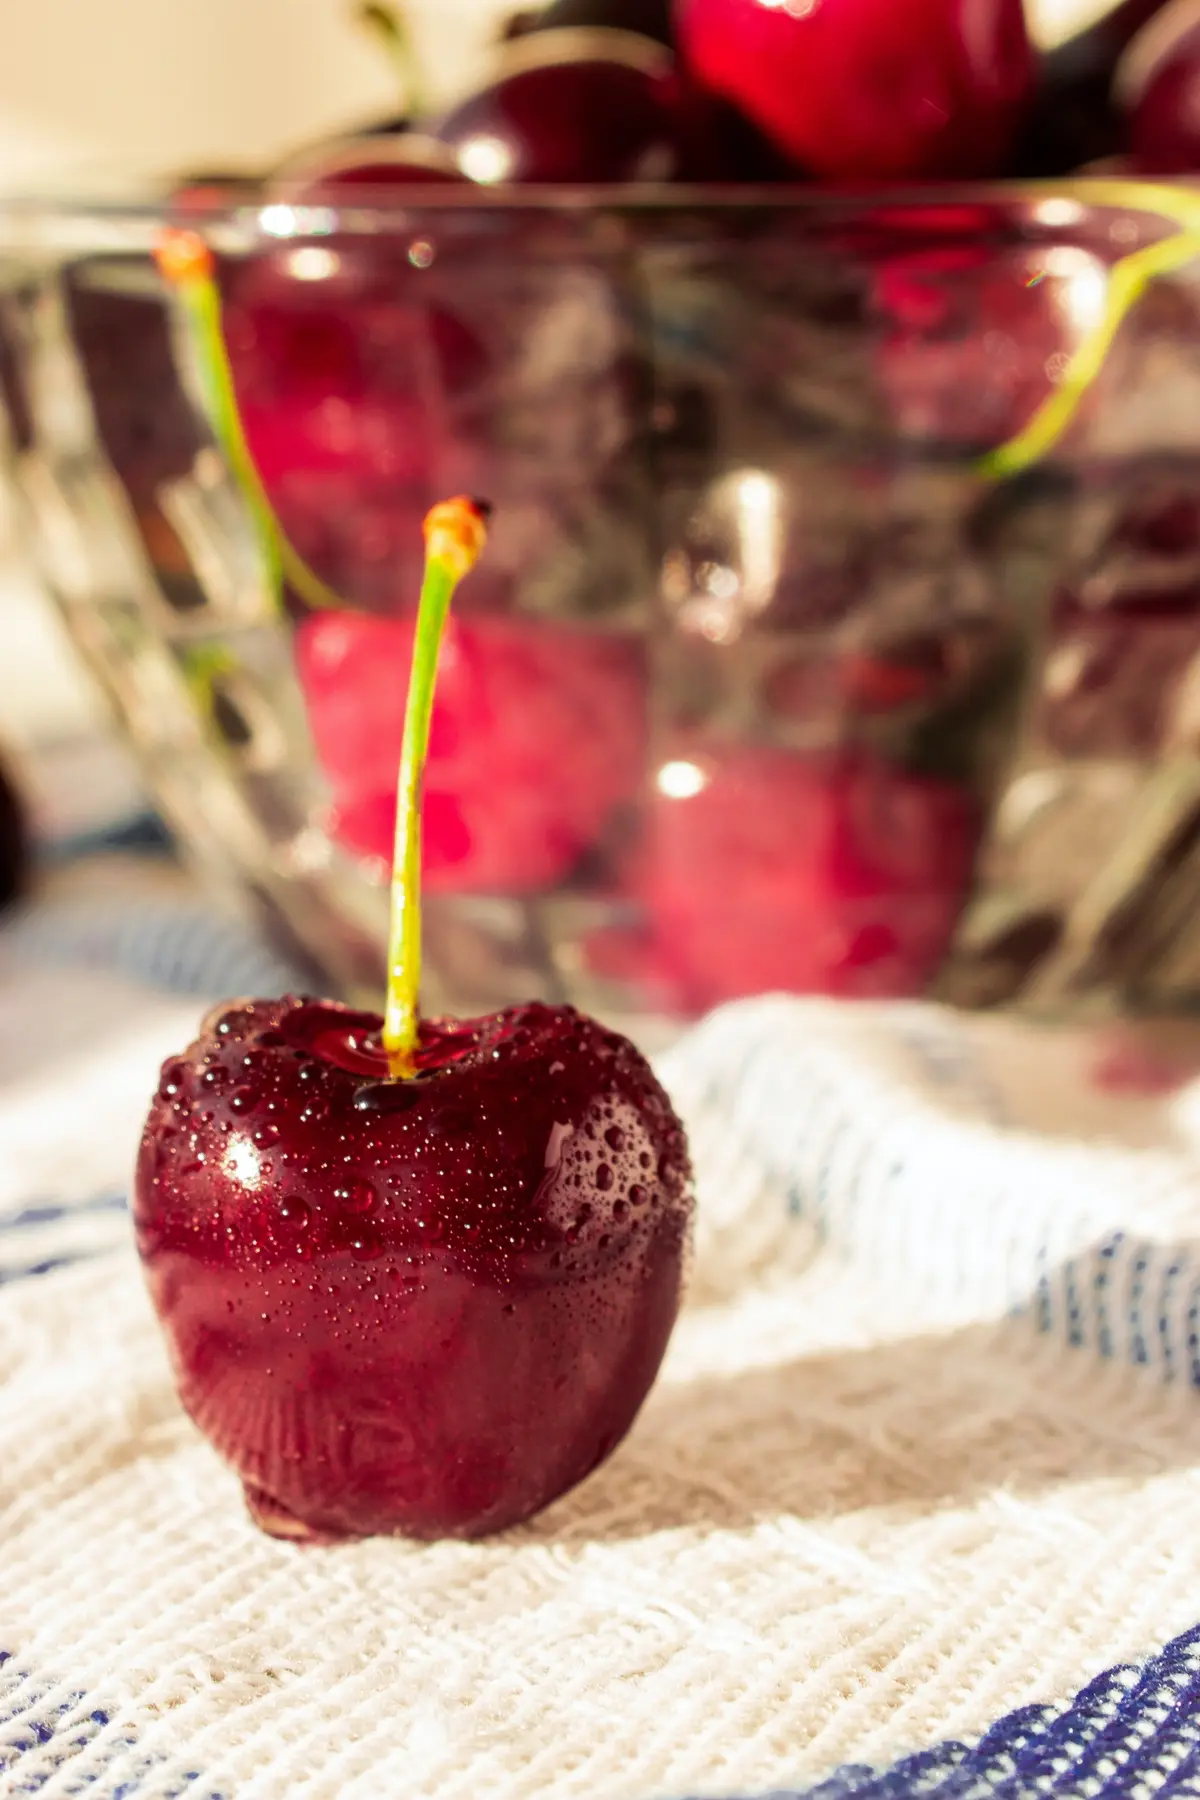 one red sweet cherry contains 1 gram net carbs